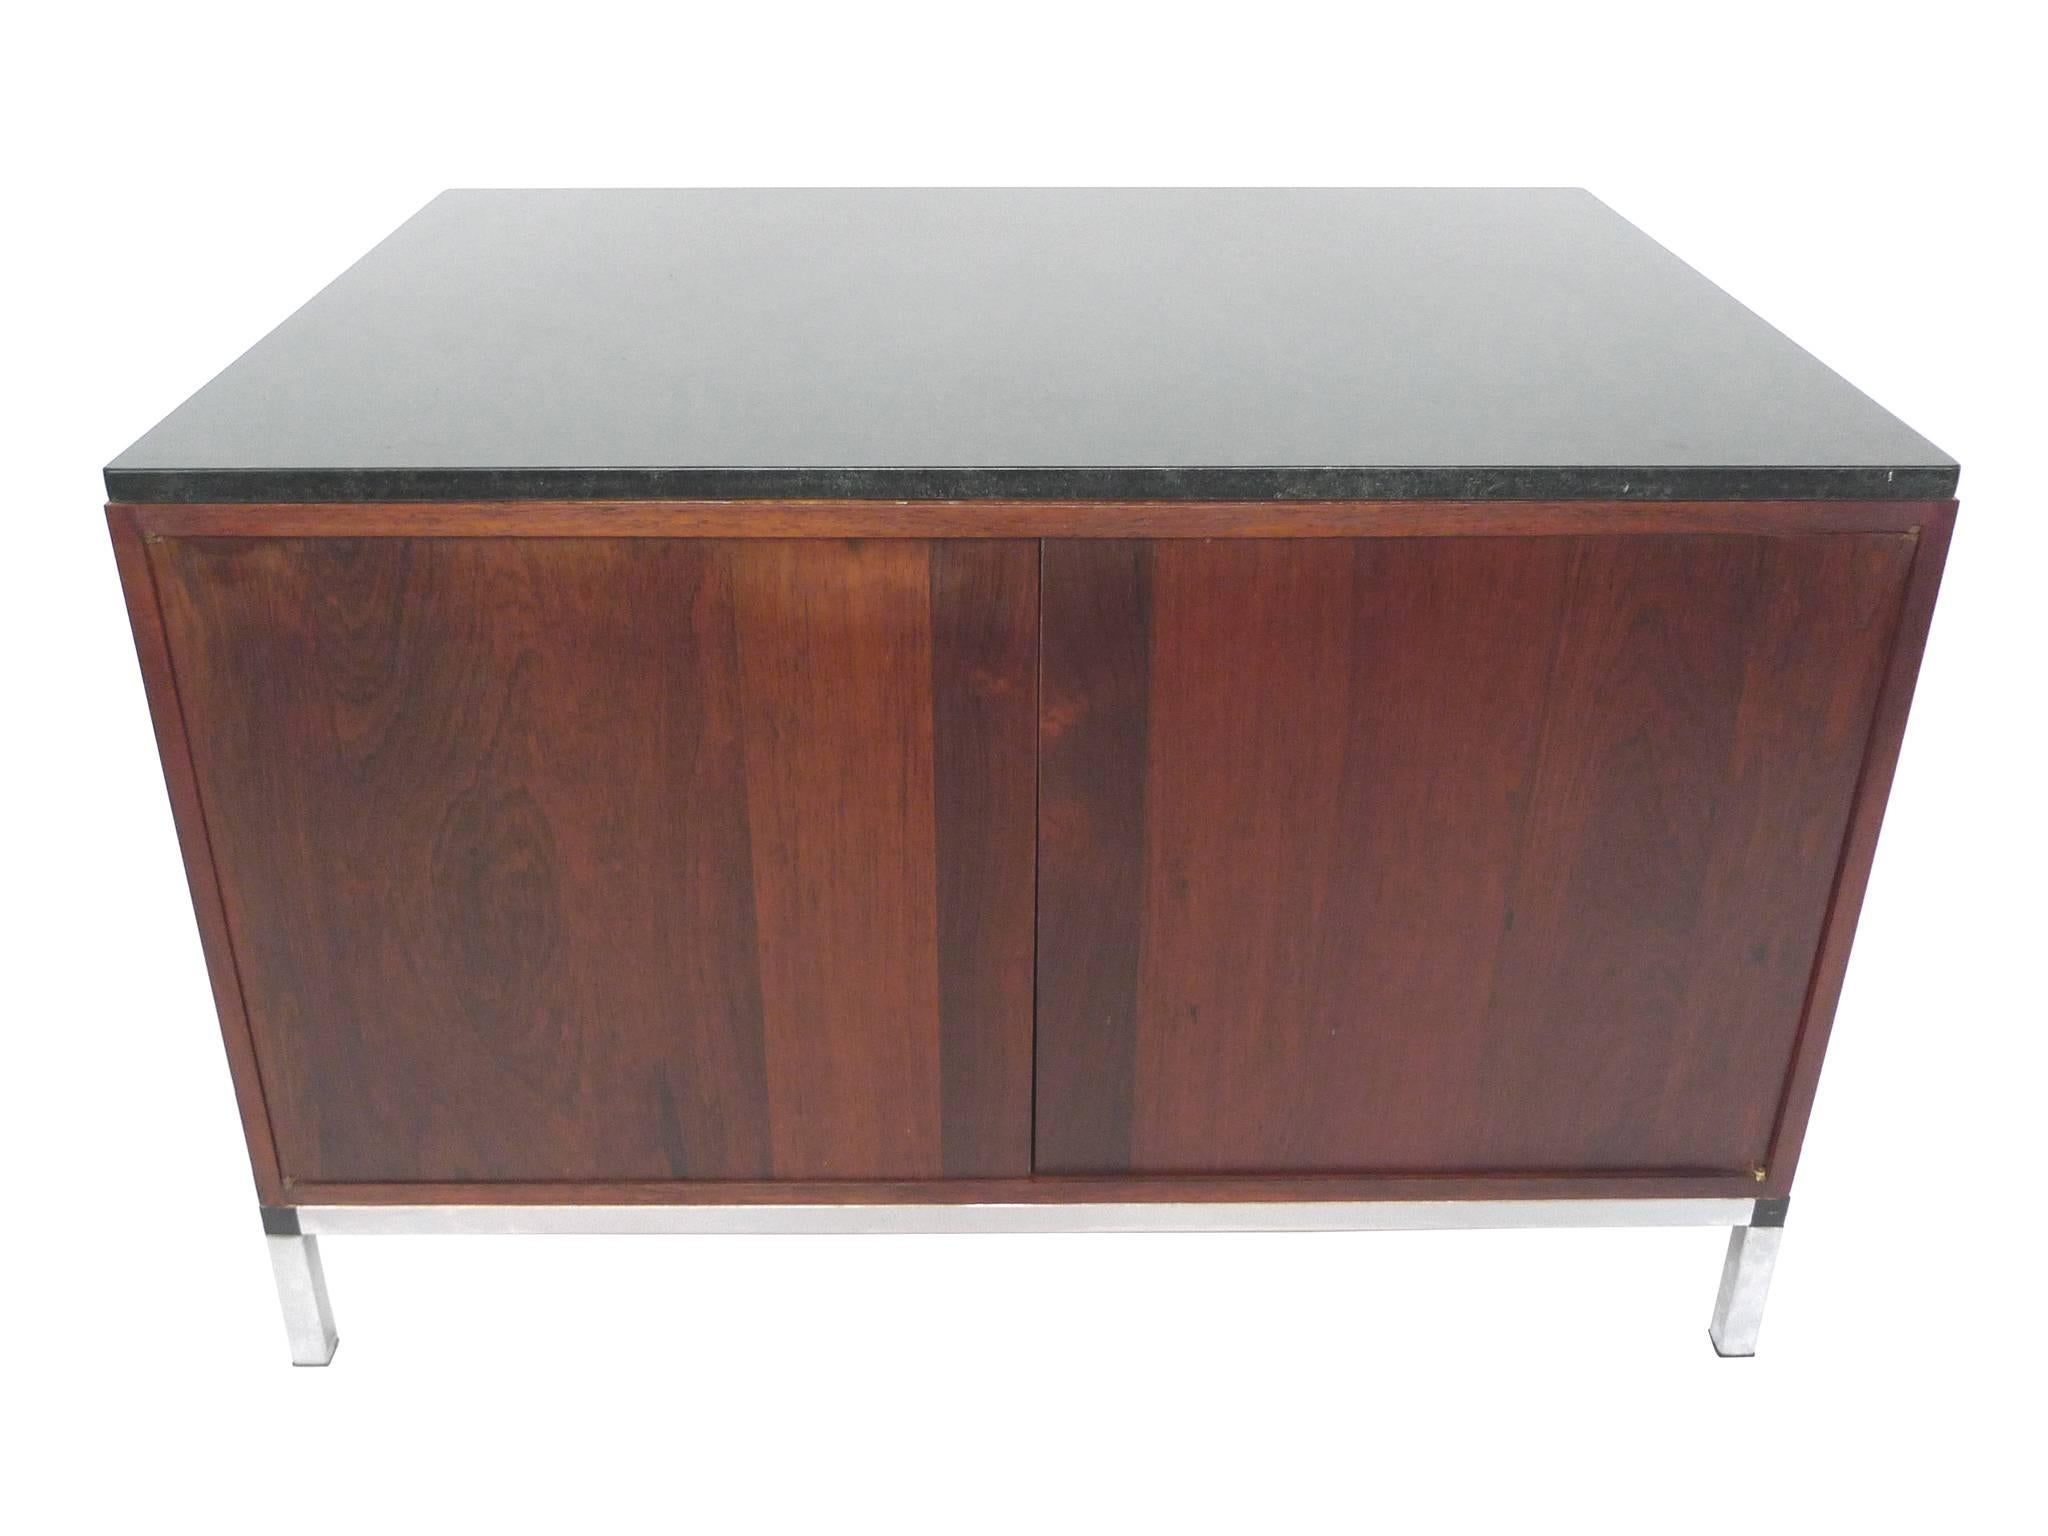 This Midcentury cabinet is in the style of Florence Knoll, whose Minimalist designs made use of simple shapes and clean lines. The cabinet consists of a black marble top, a rosewood body, a chrome base, and brass hardware. The rosewood is a rich